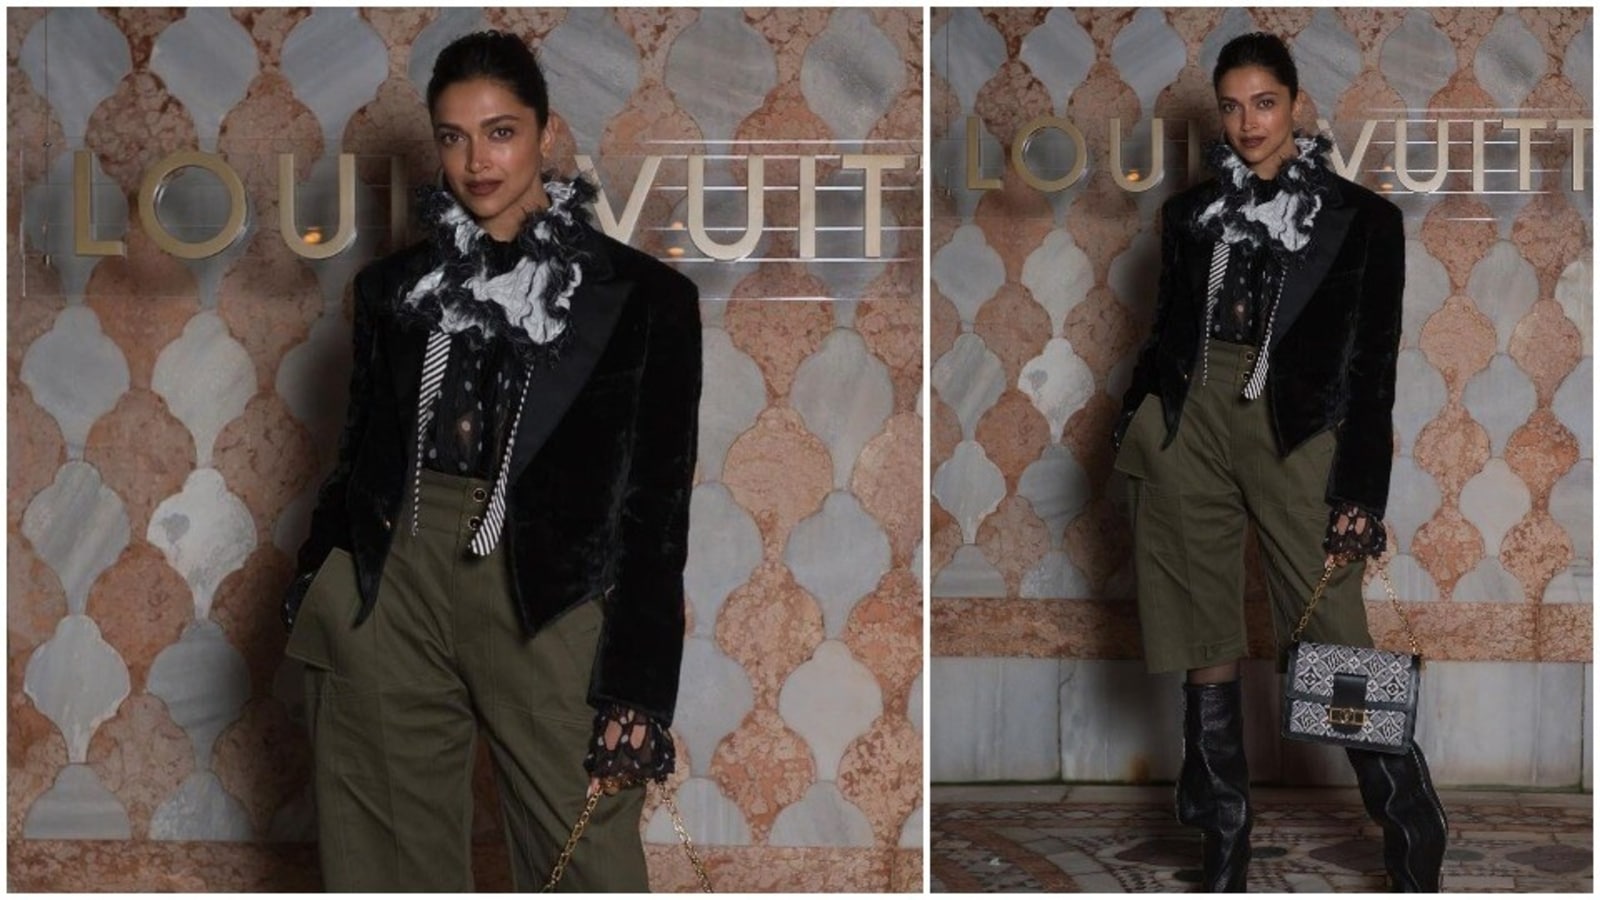 Deepika Padukone slays in an outfit from Louis Vuitton While at the BoF 500  gala in Paris 500 : Bollywood News - Bollywood Hungama